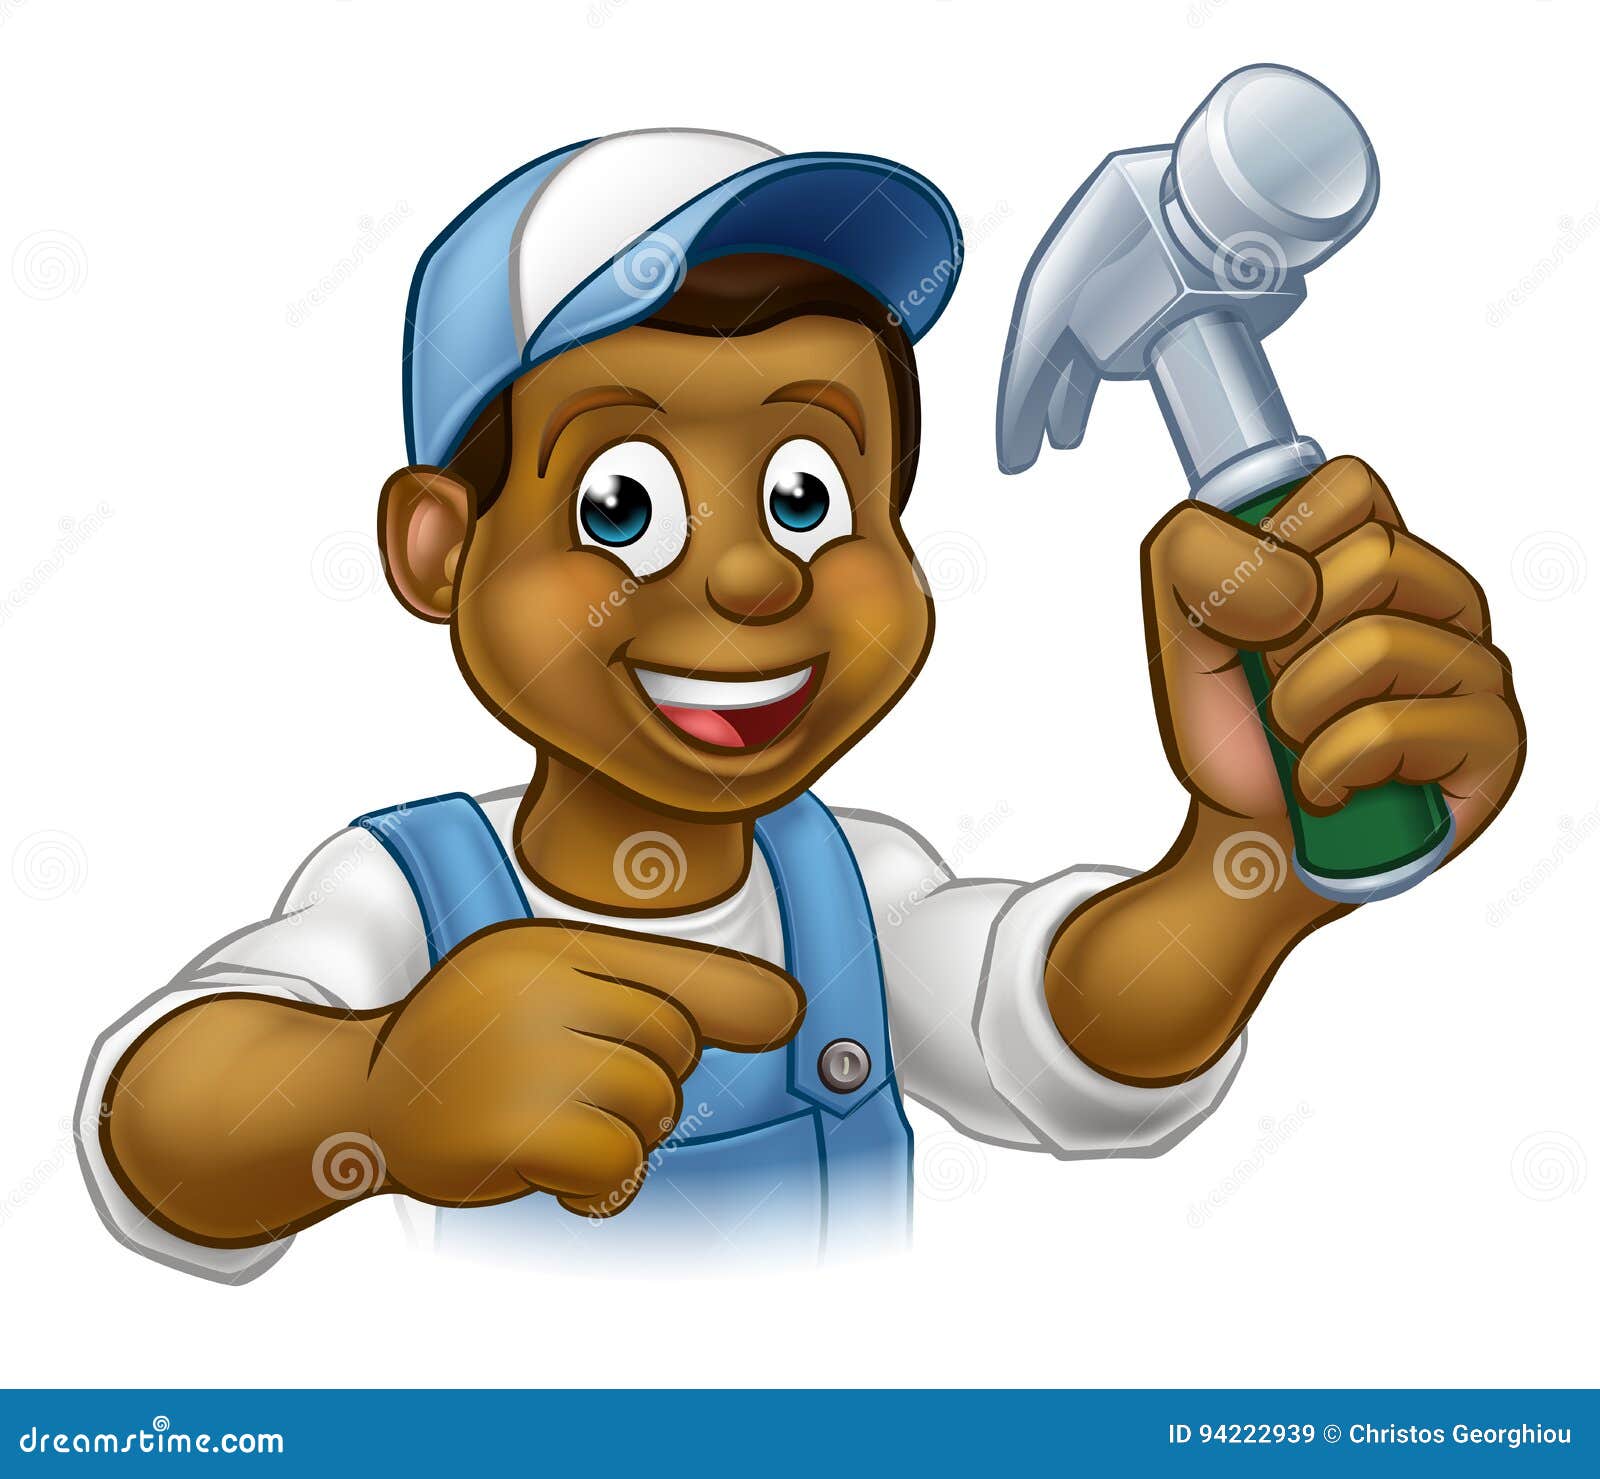 Download Janitor Cartoons, Illustrations & Vector Stock Images - 860 Pictures to download from ...